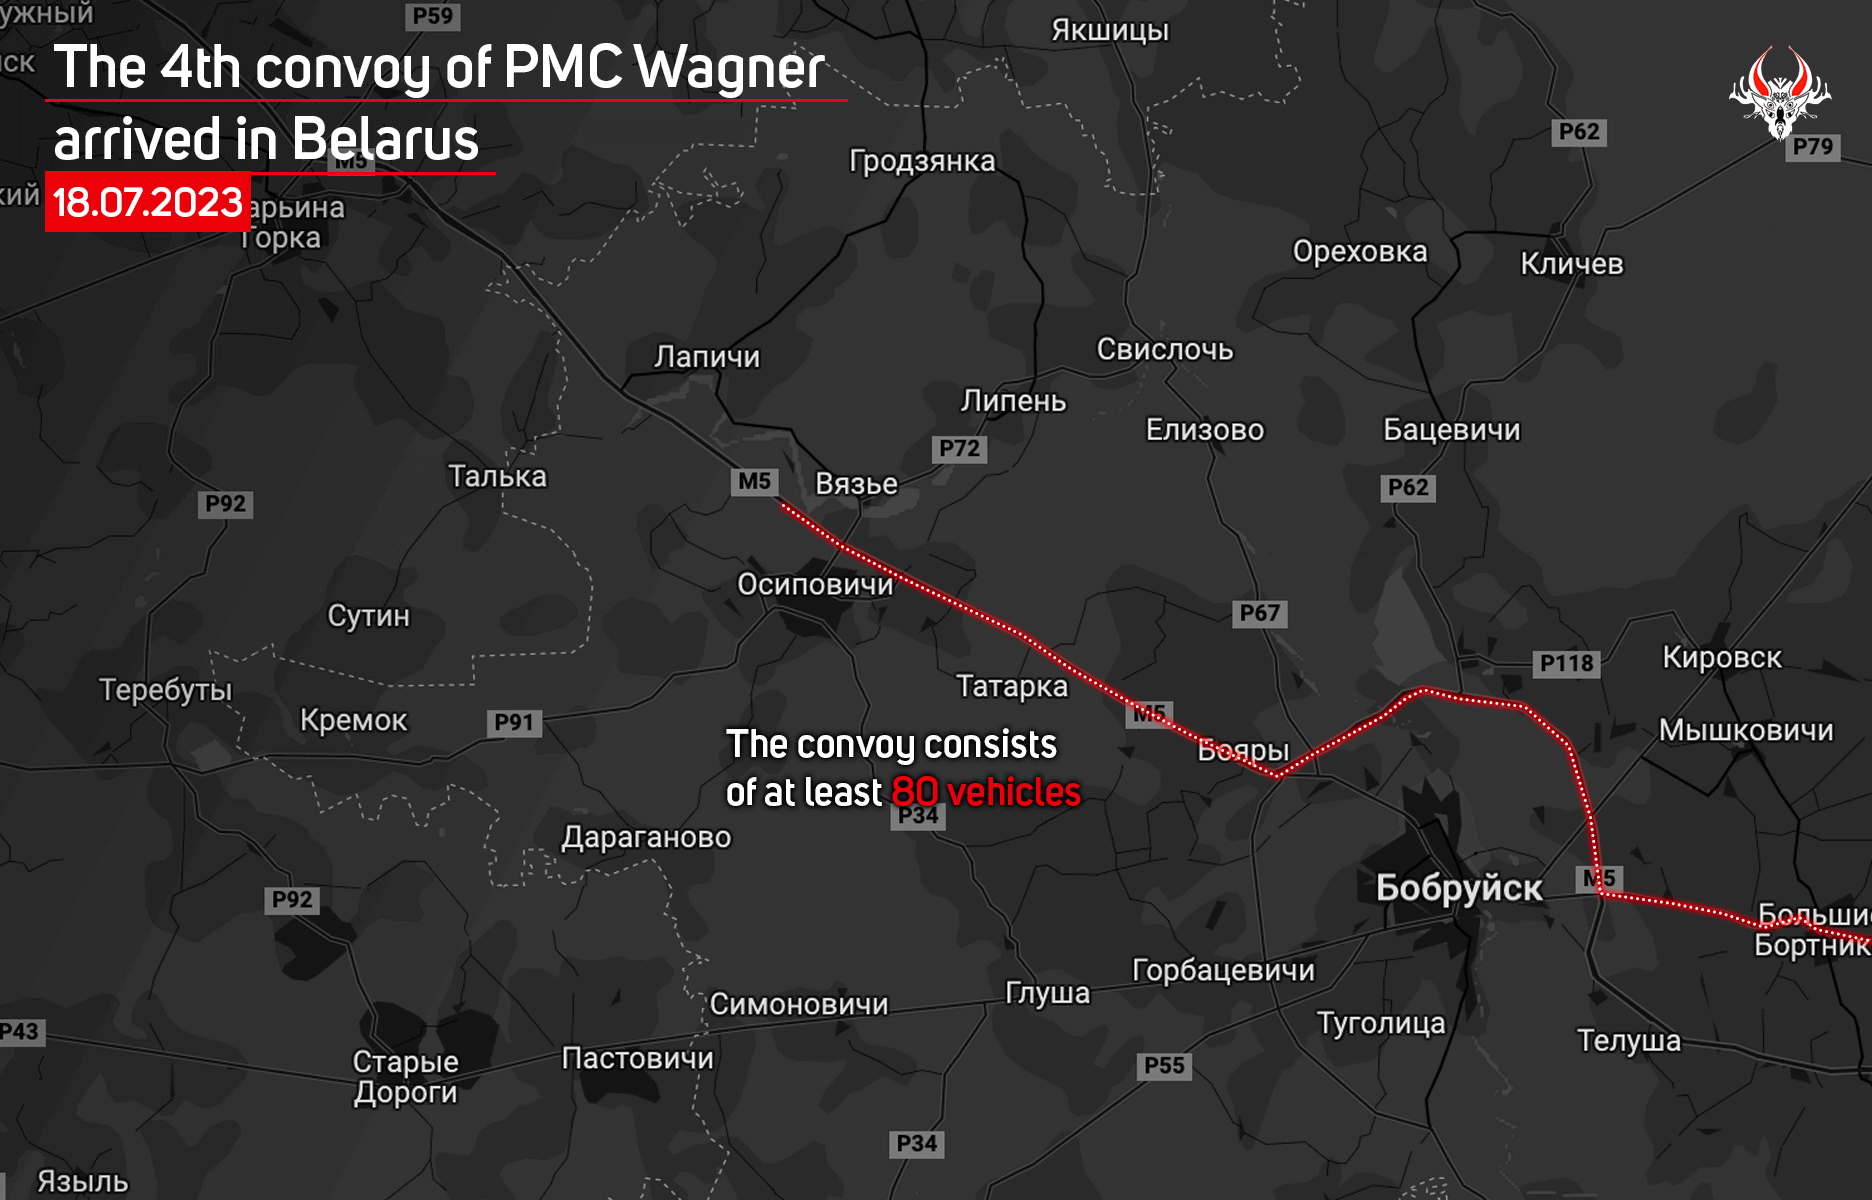 The 4th convoy of PMC Wagner arrived in Belarus: it consists of over 80 vehicles